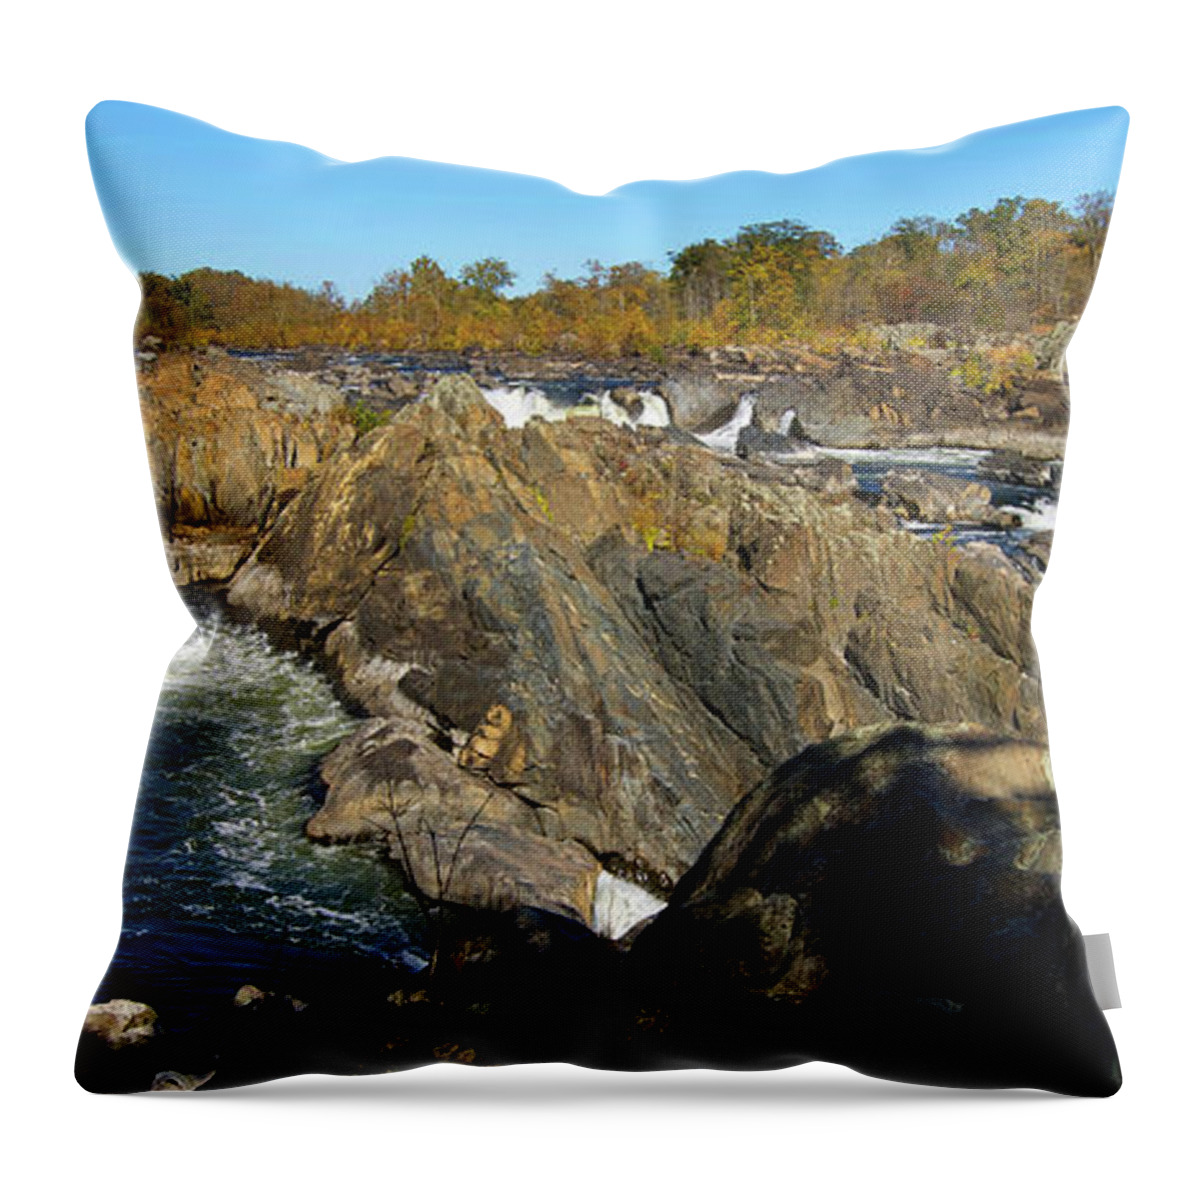 Culture Throw Pillow featuring the photograph Pan Of The Potomac by Skip Willits